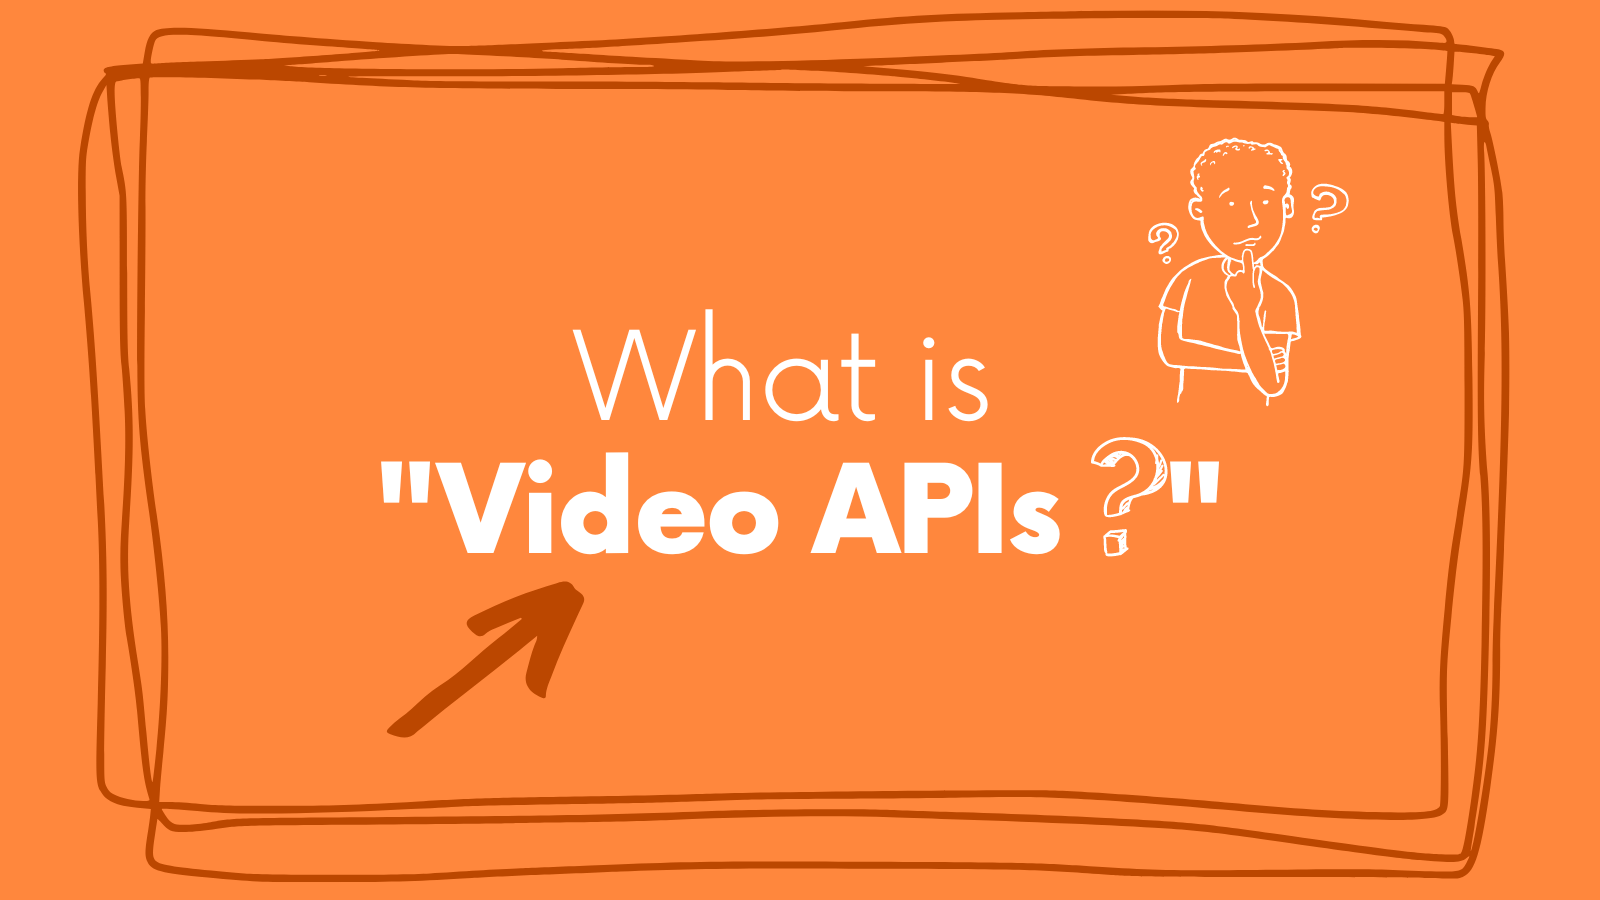 Use Video APIs to build business-specific apps – WebRTC